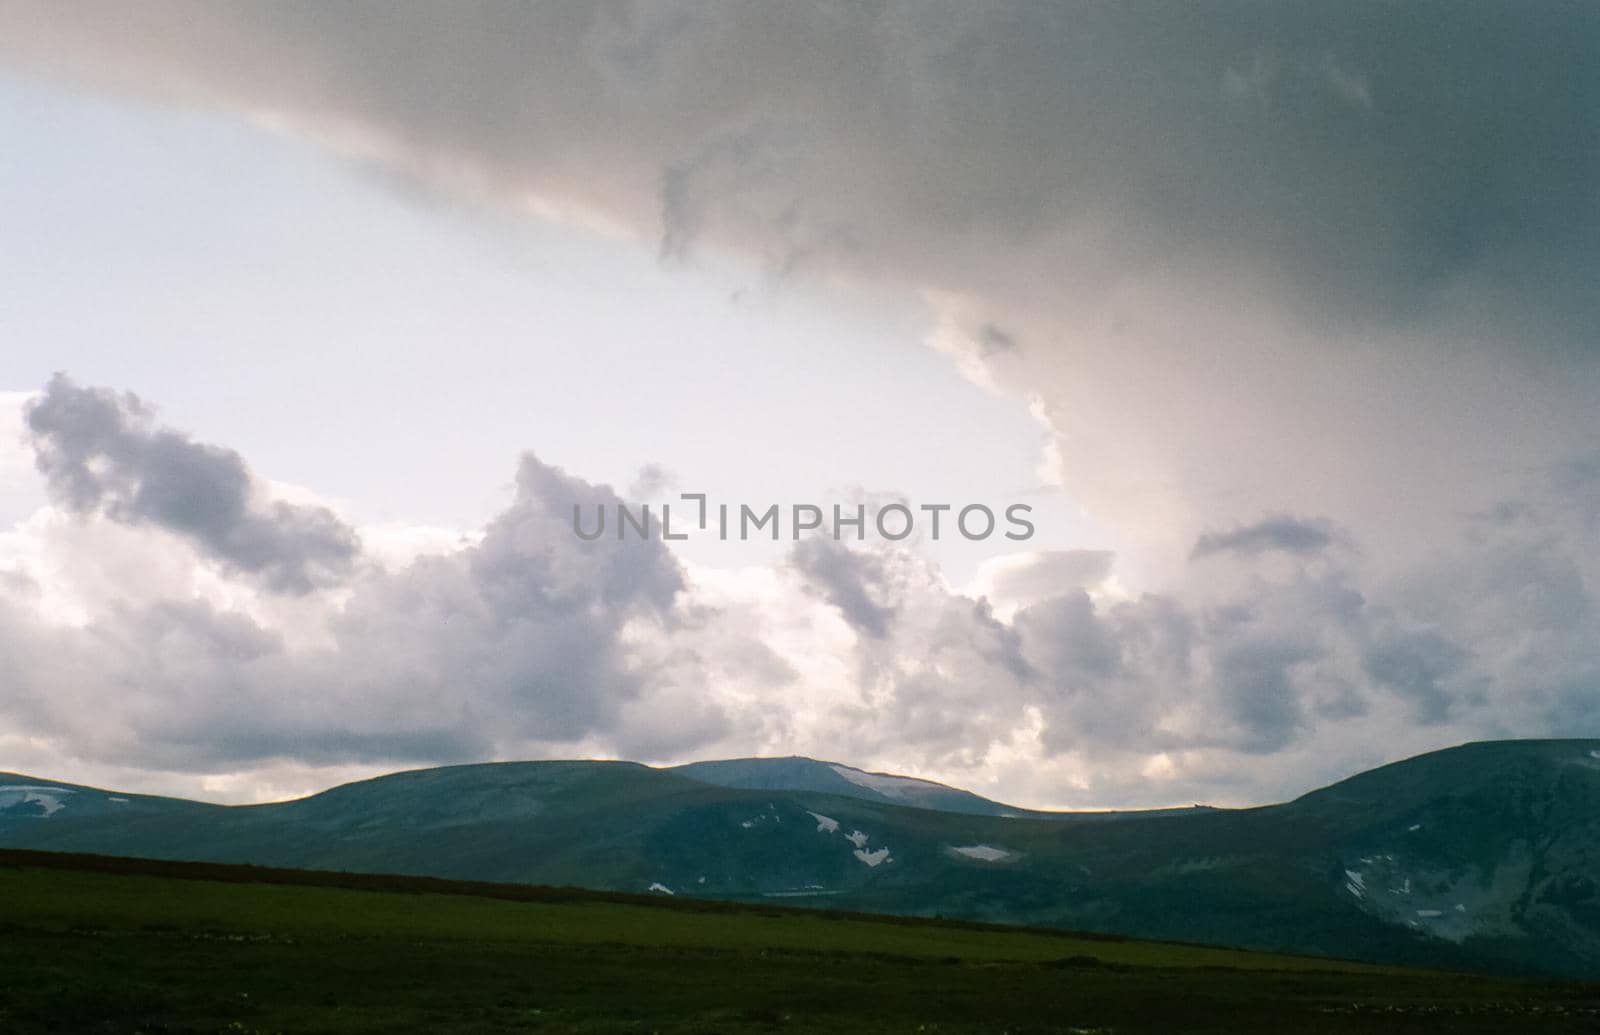 Altai landscape mountains and clouds. Nature is altai.